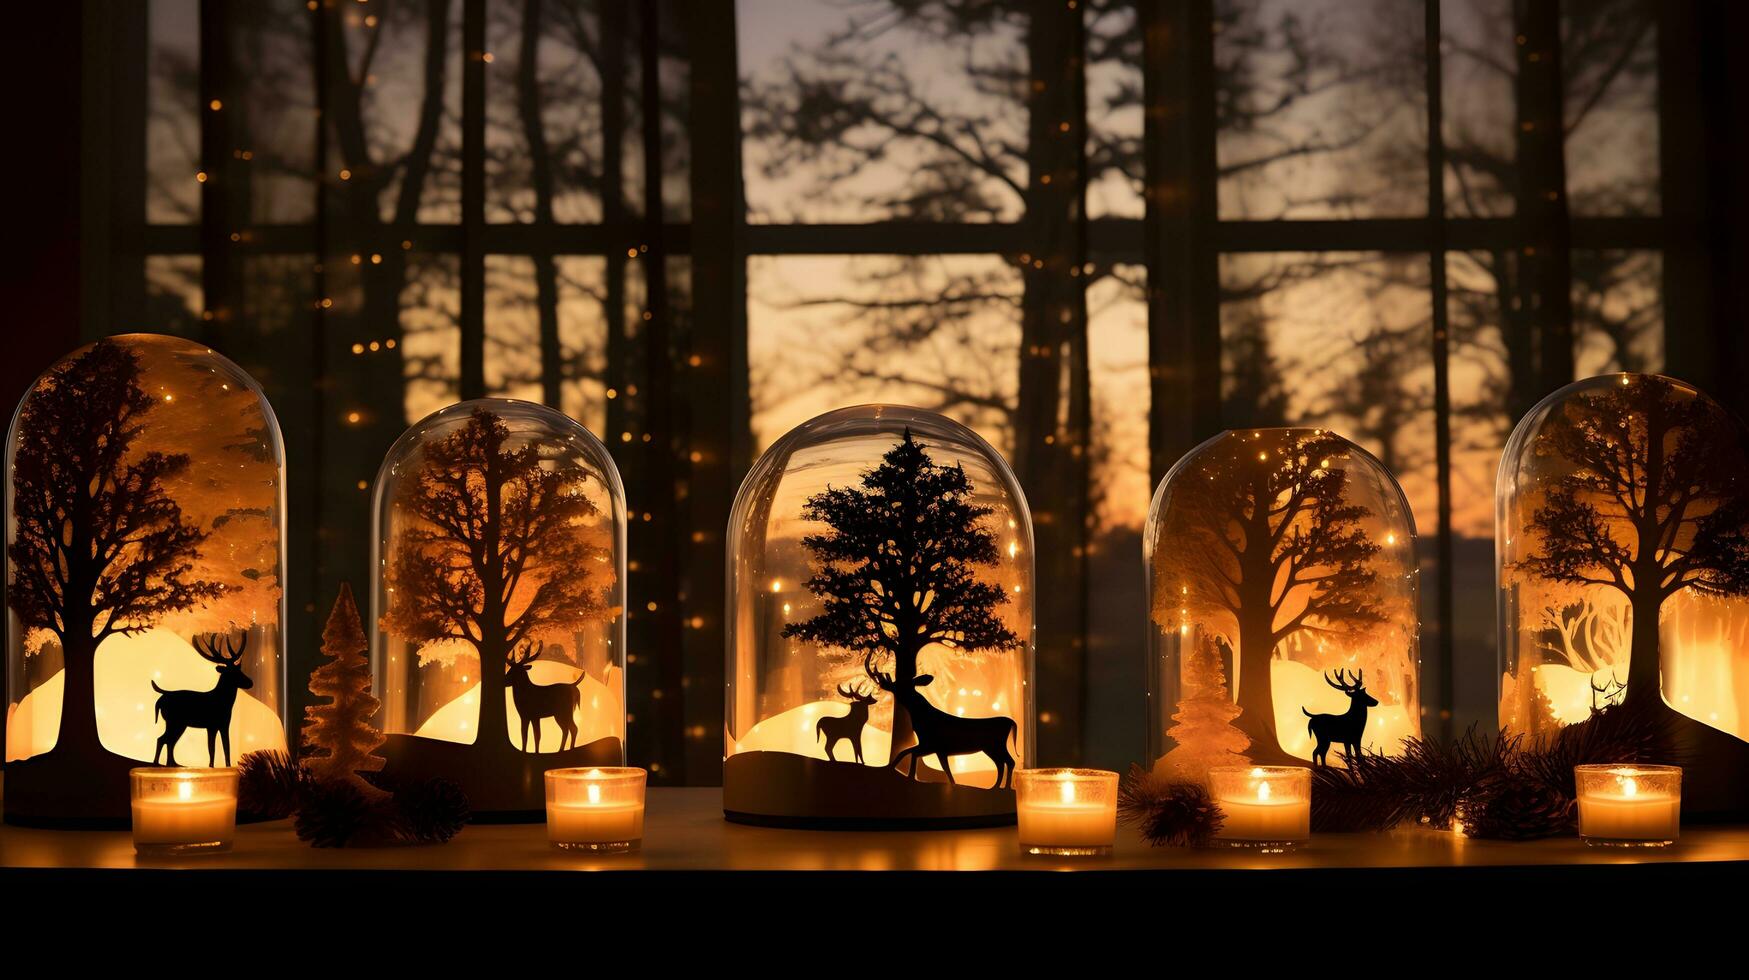 Winter Wonderland with Deer, Trees, and Candles in Glass Domes photo